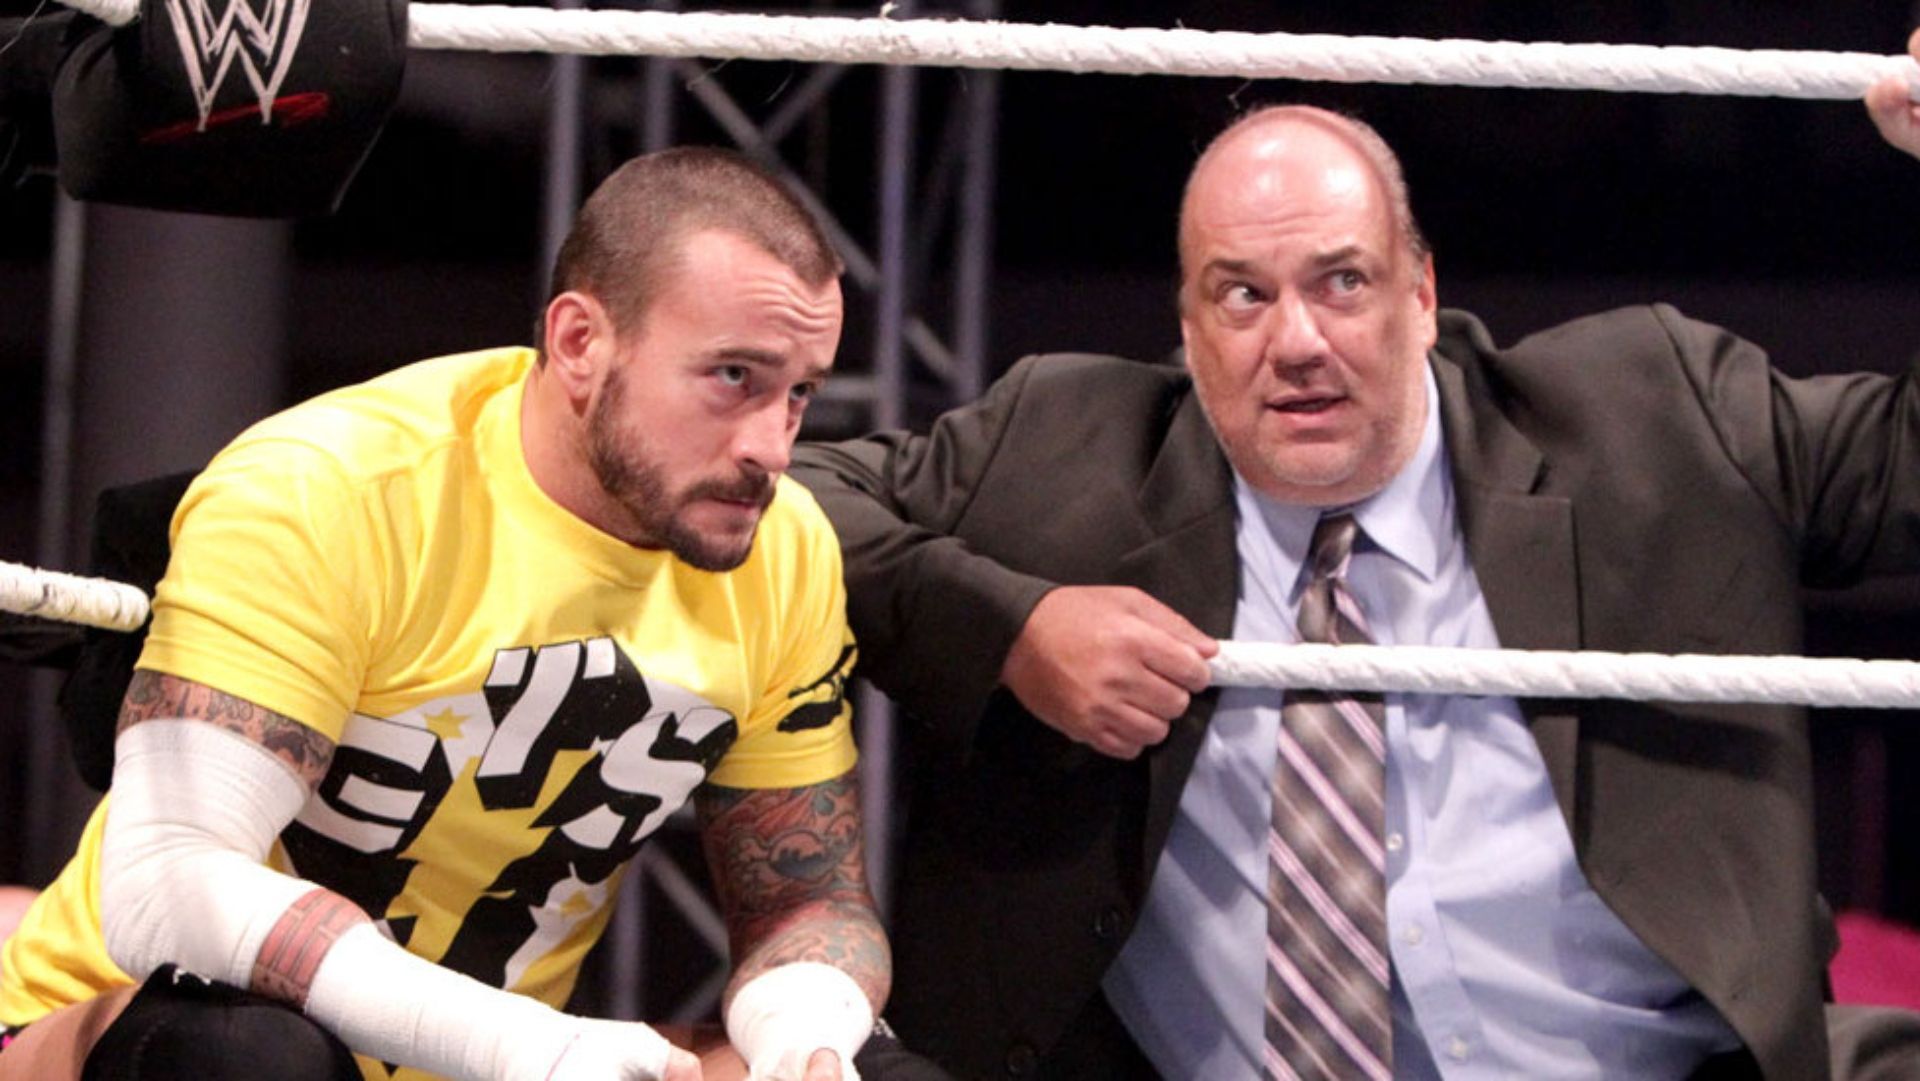 What was your reaction to CM Punk